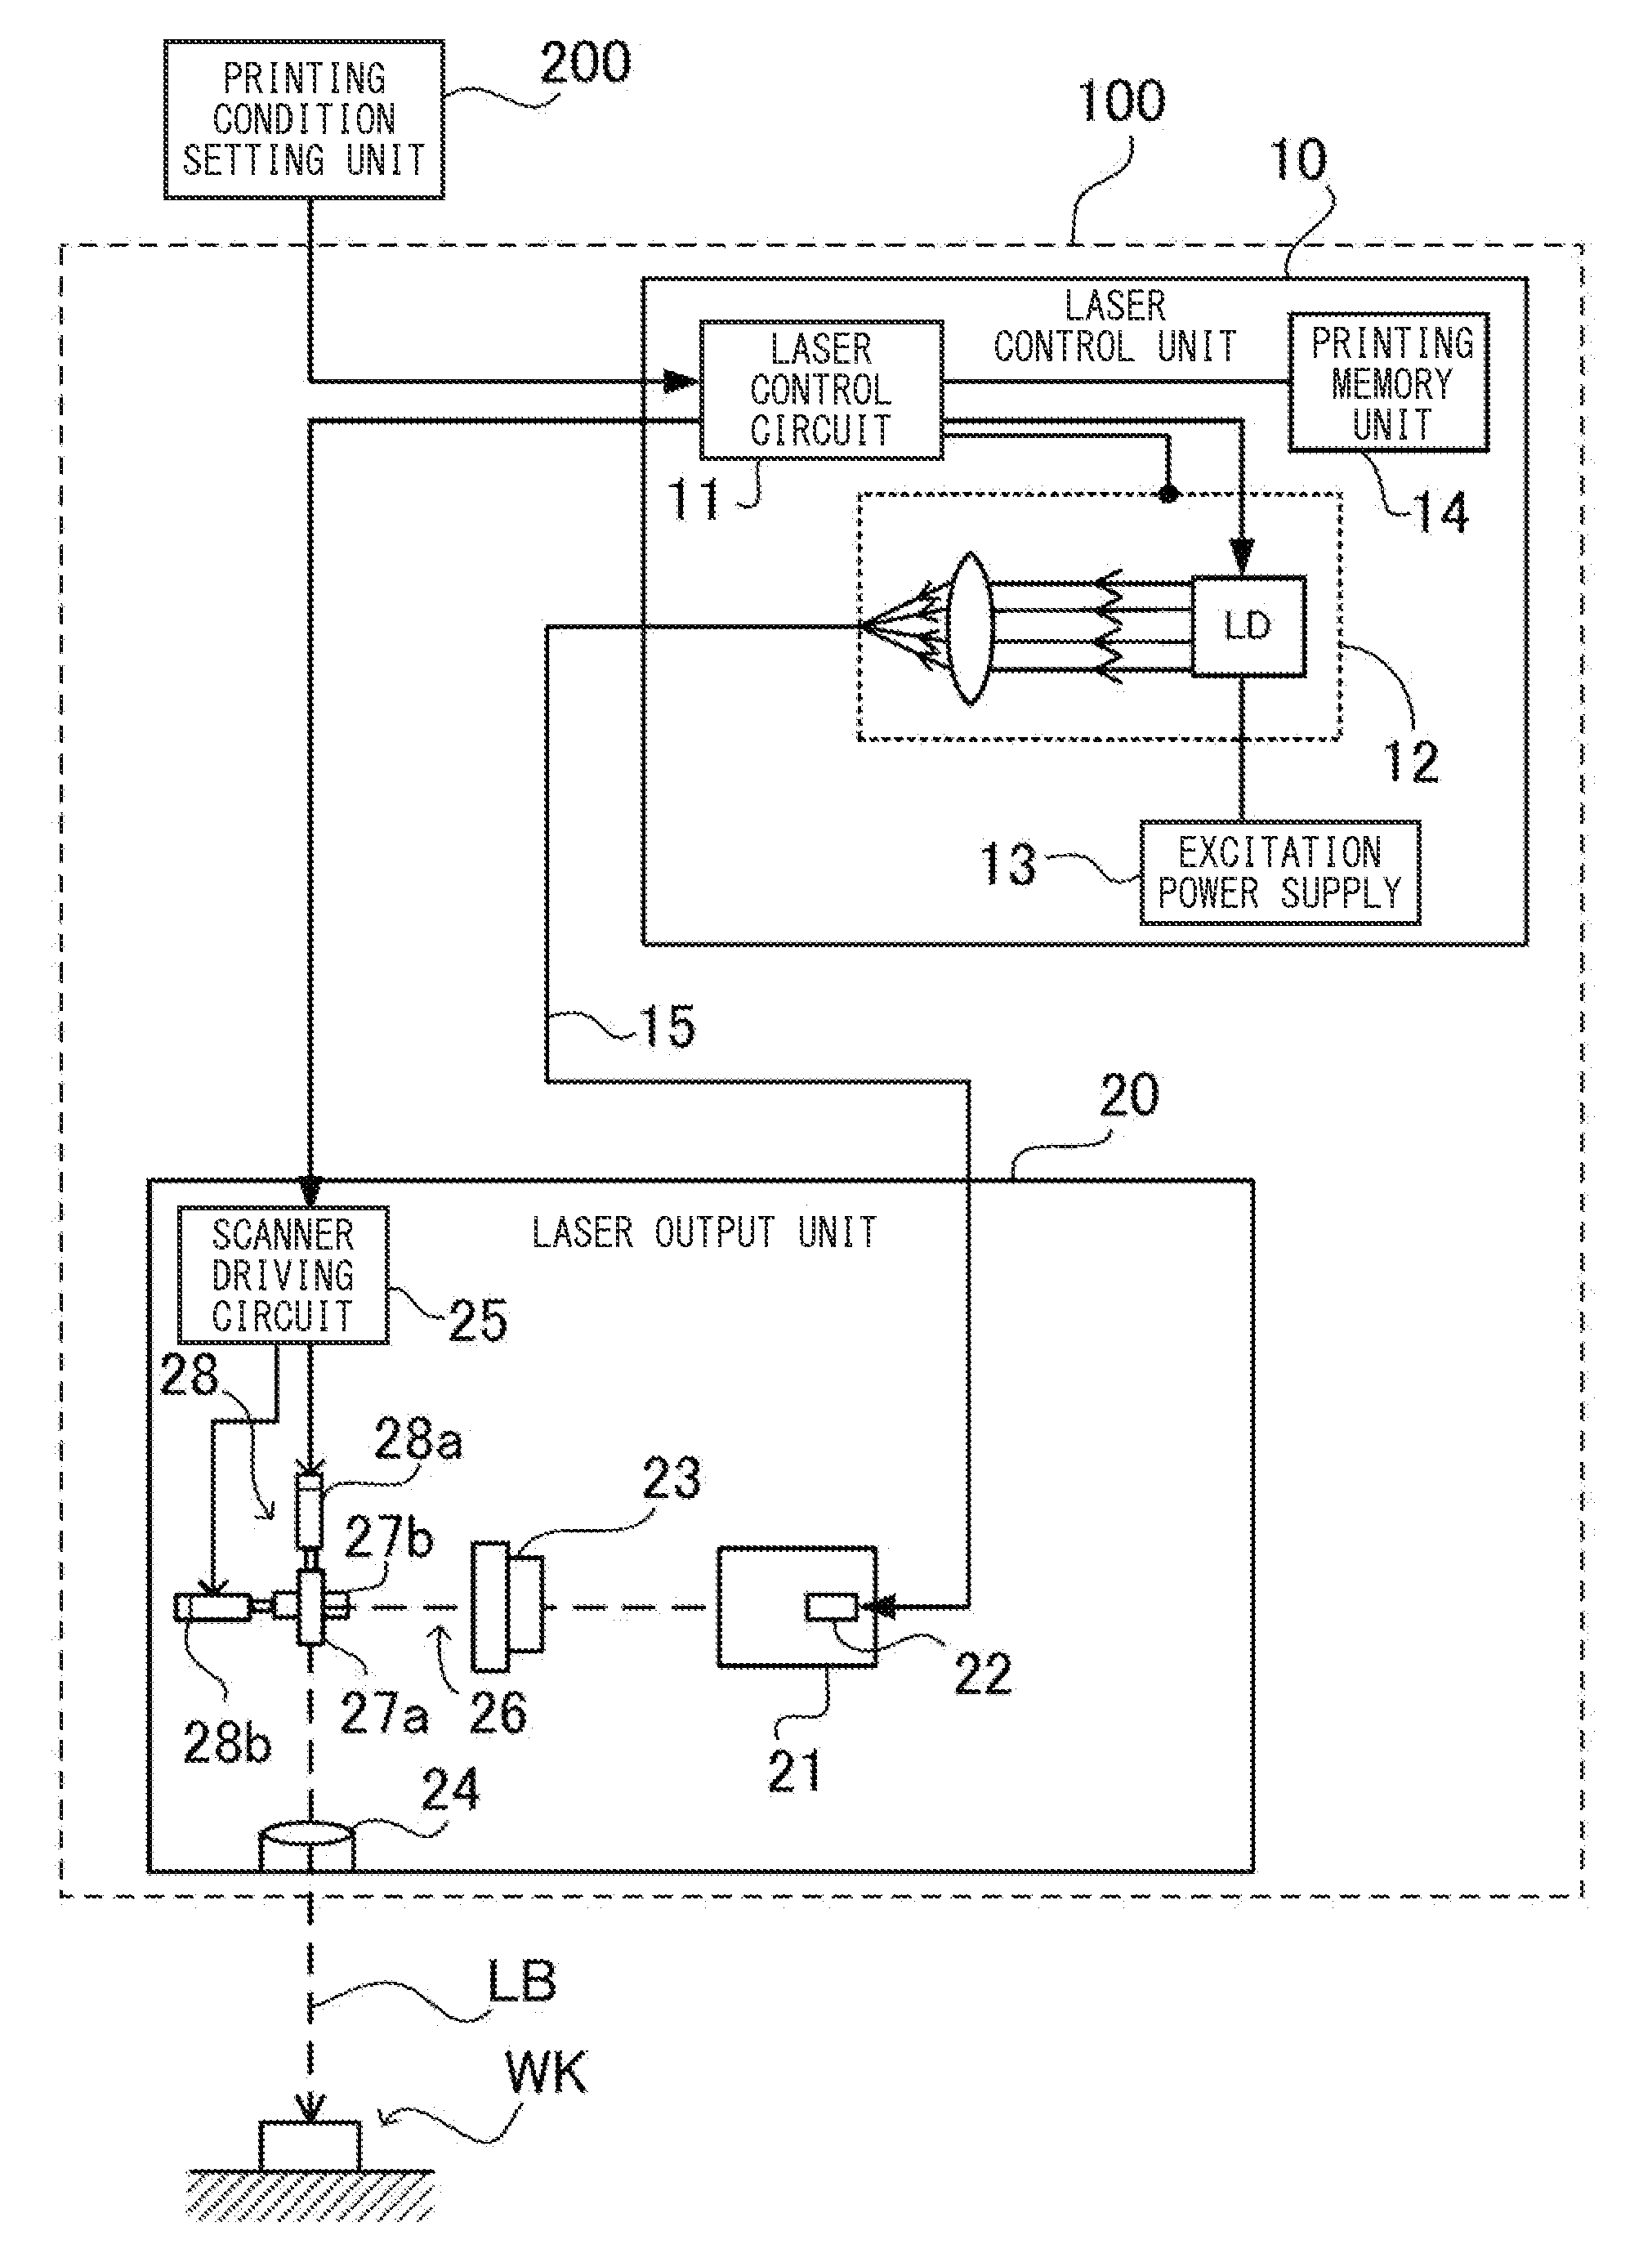 Printing Quality Evaluation System, Laser Marking Apparatus, Printing Condition Setting Device, Printing Quality Evaluation Apparatus, Printing Condition Setting Program, Printing Quality Evaluation Program, And Computer-Readable Recording Medium